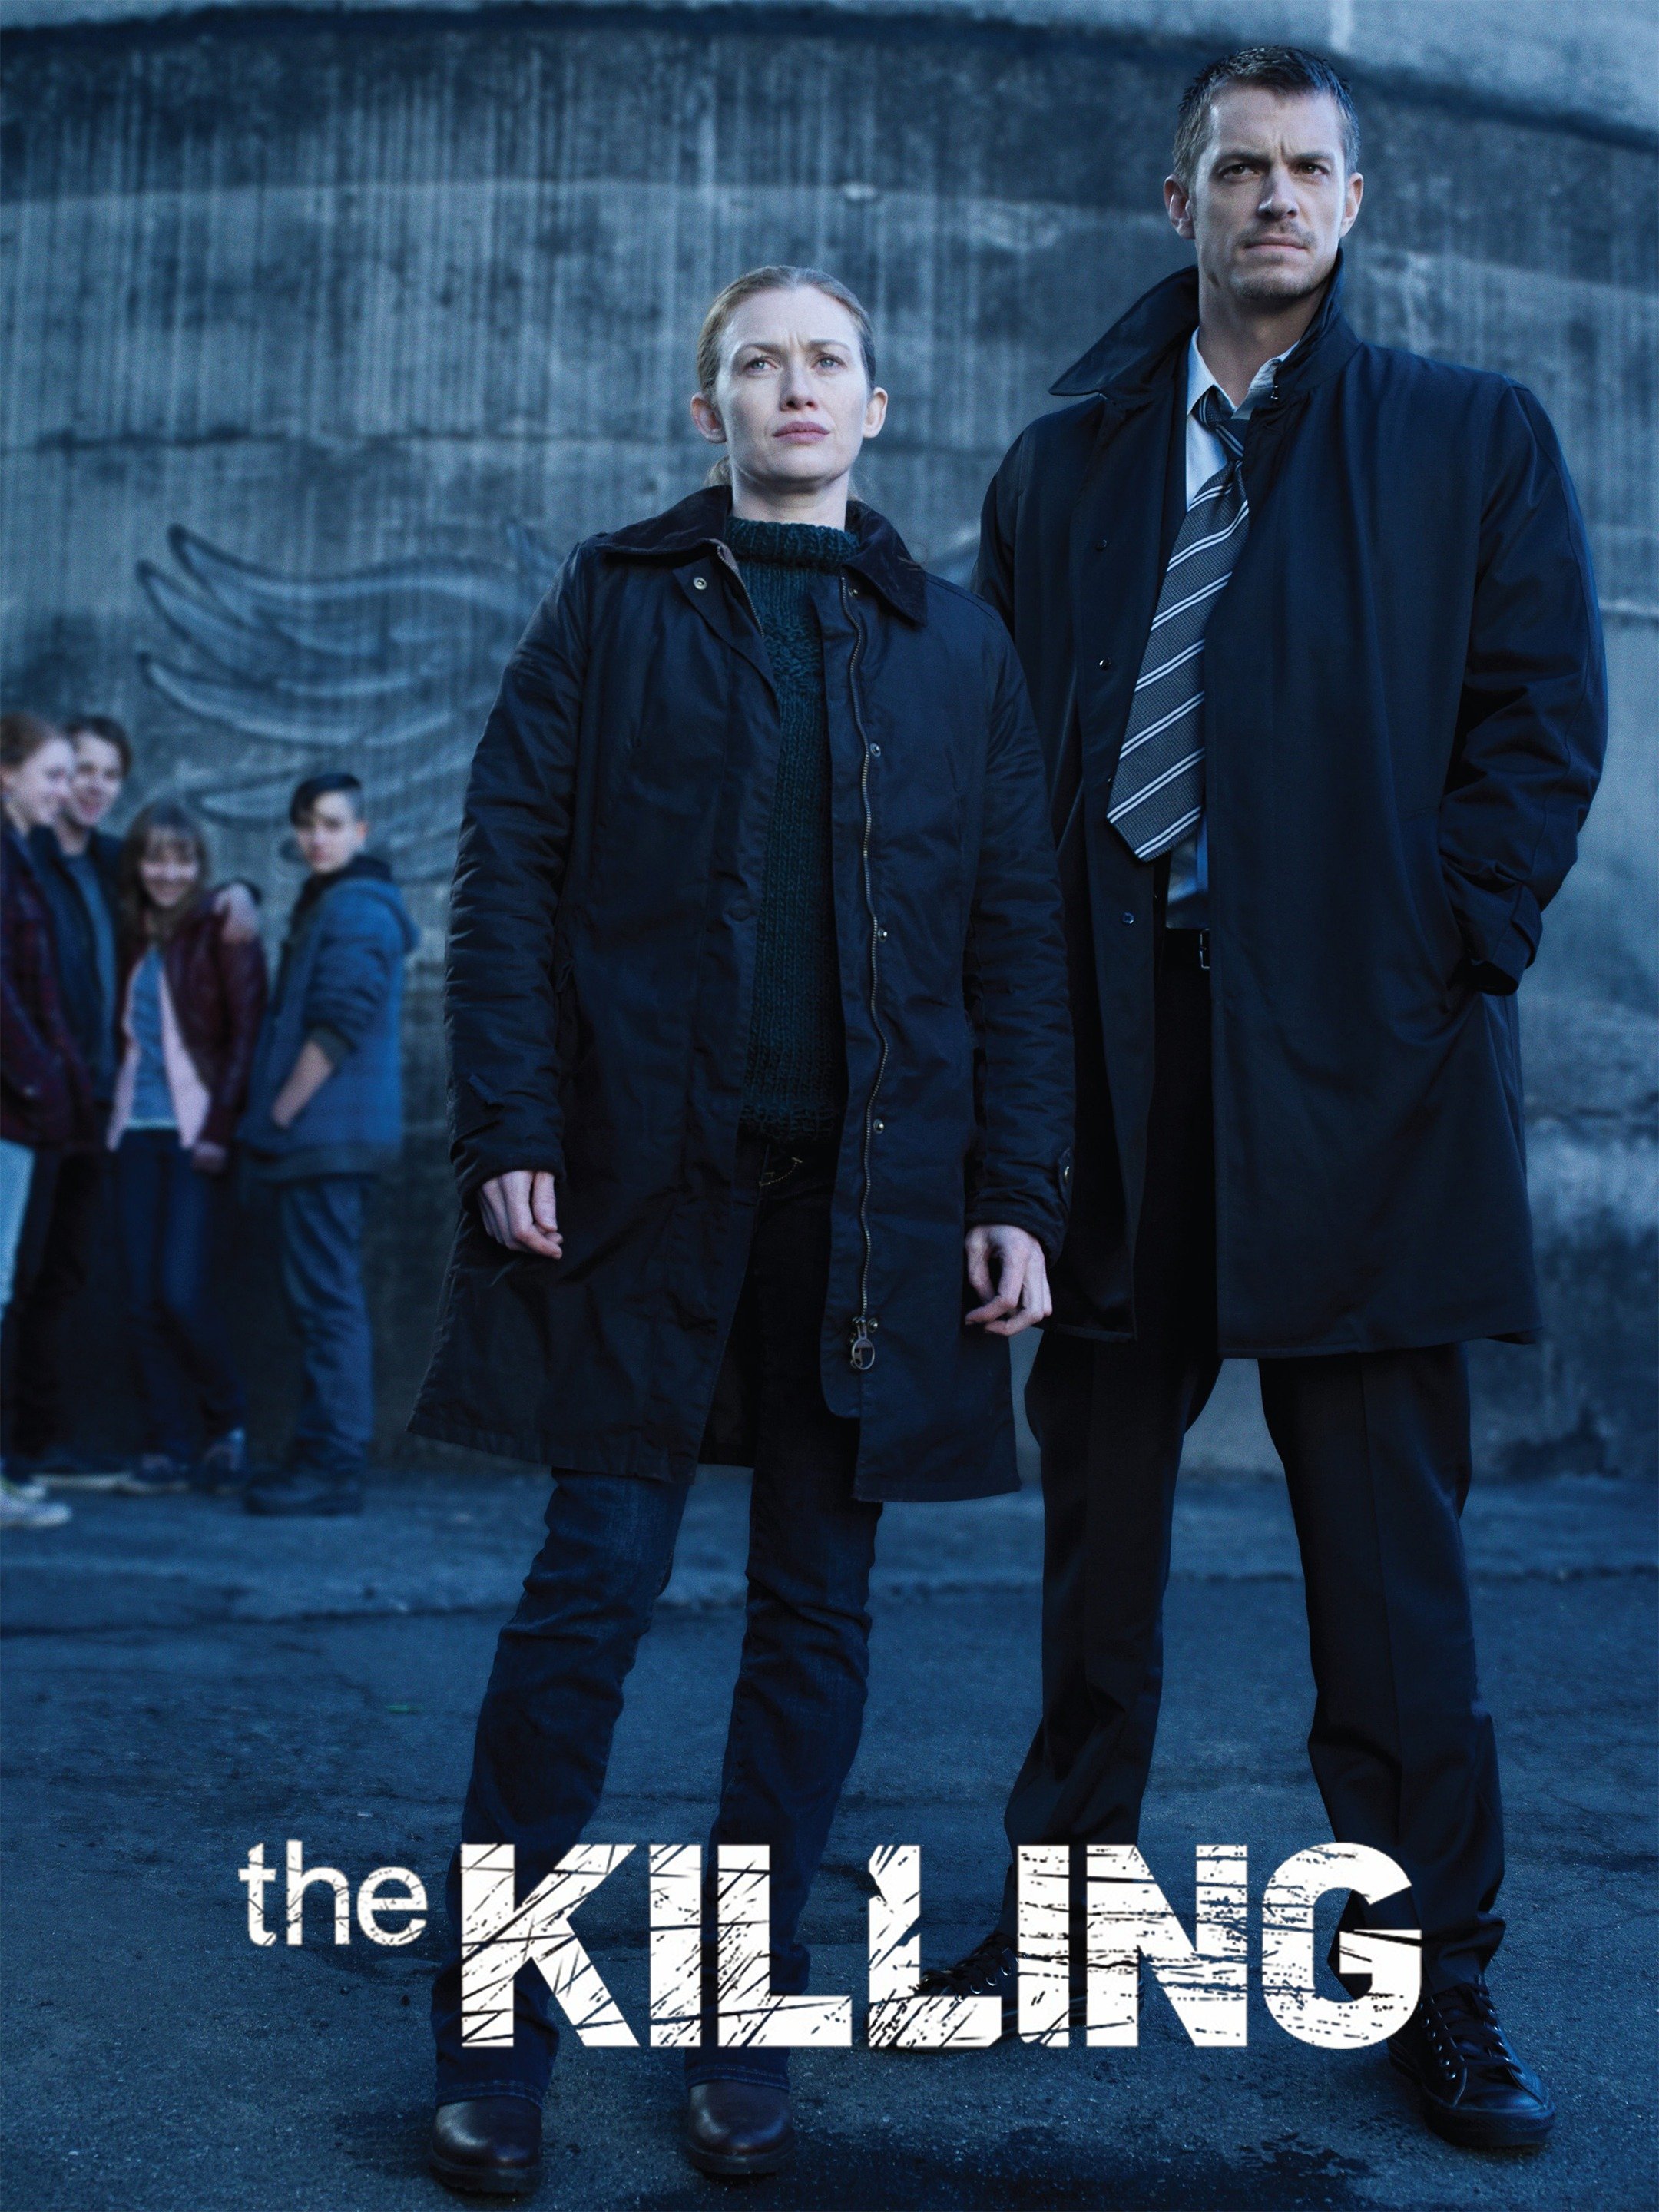 The Killing Season 2 Pictures Rotten Tomatoes